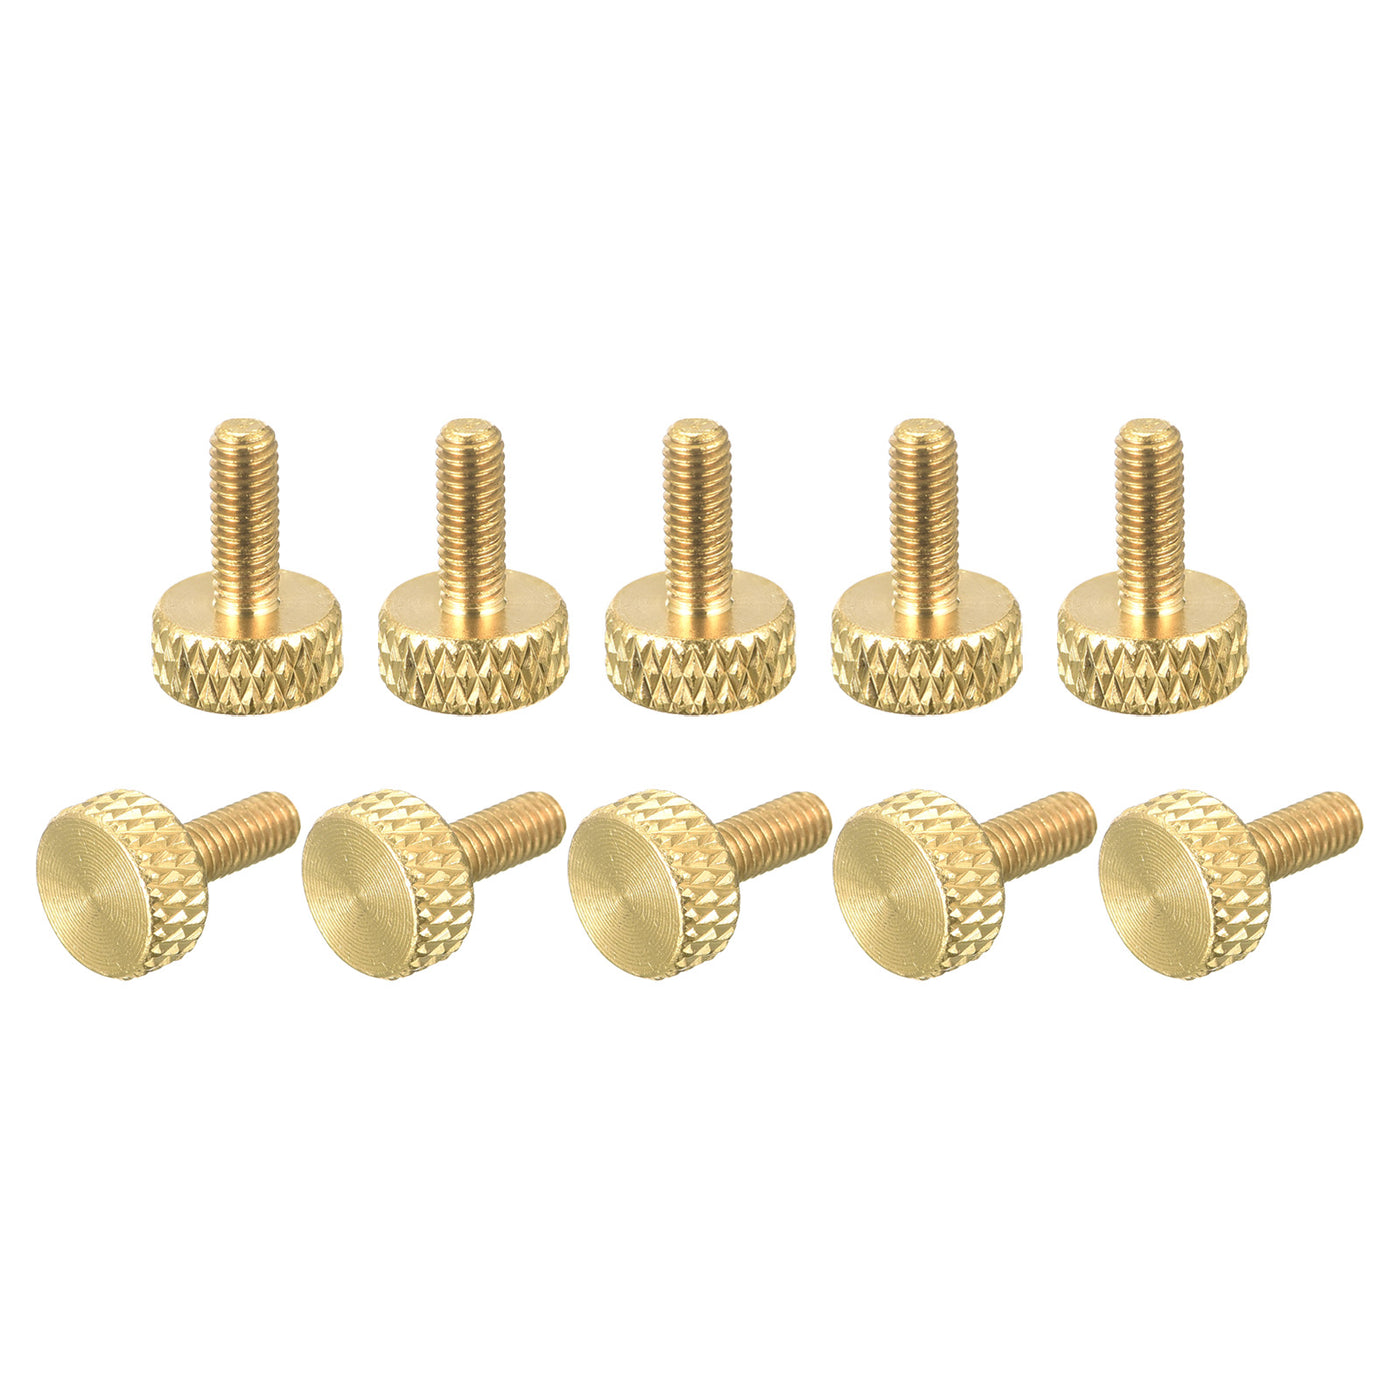 uxcell Uxcell 10Pcs Brass Knurled Thumb Screws, M3x8mm  11.5mm Length Flat Grip Bolt Knobs Fasteners for Electronic, Mechanical